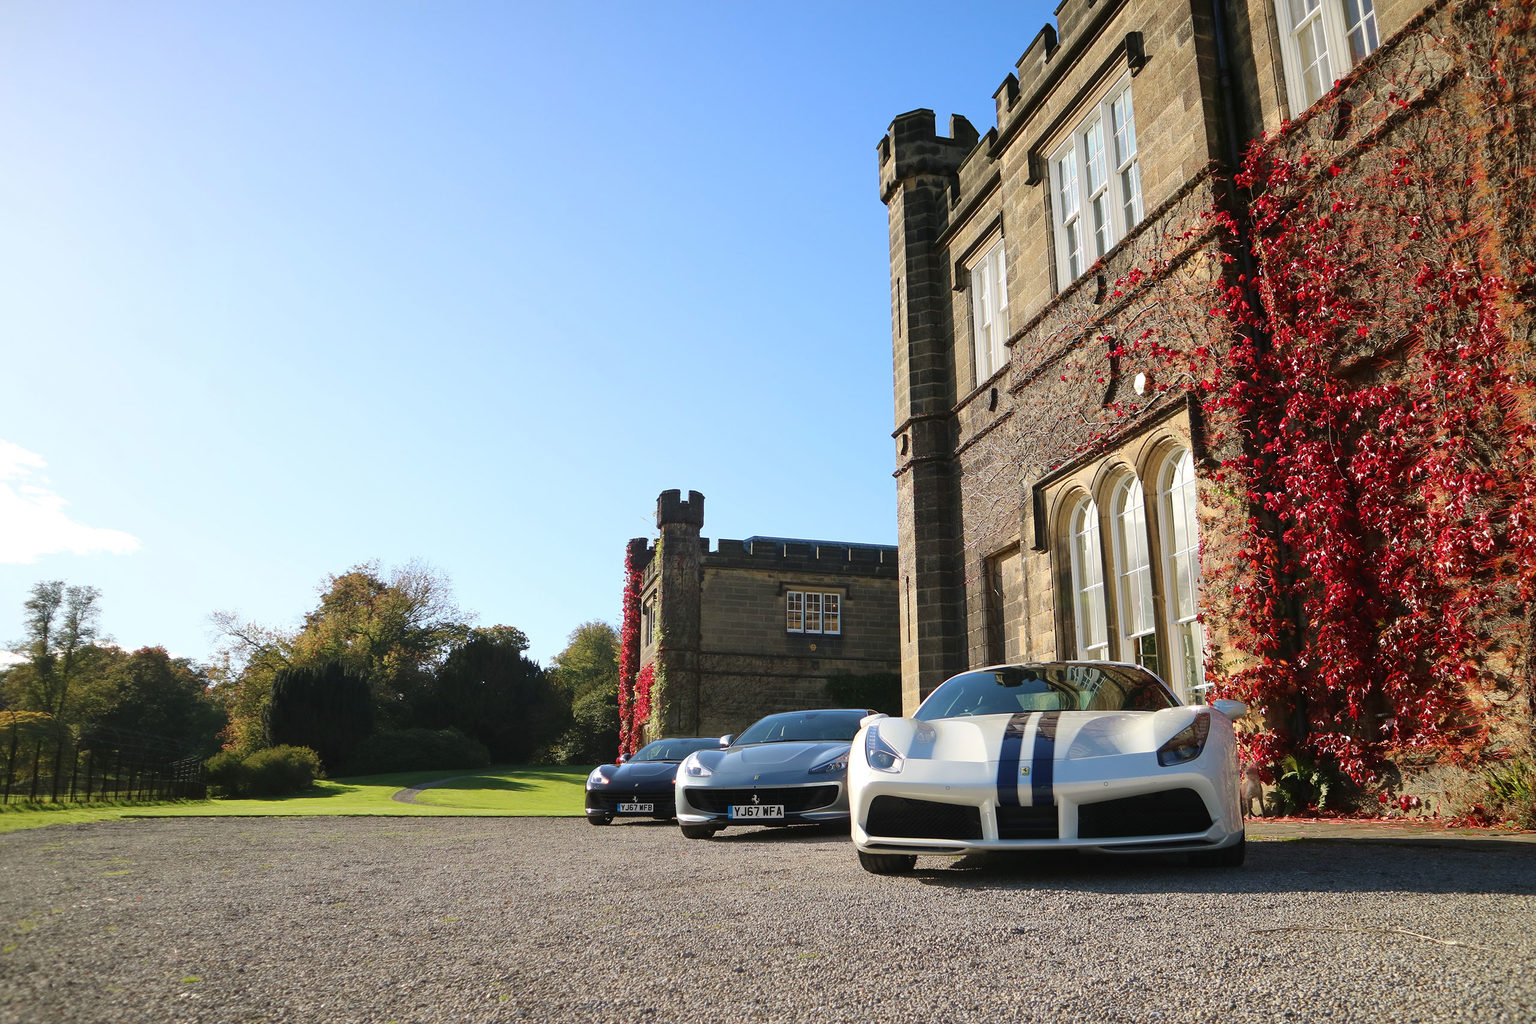 Three supercars parked in front of Swinton Park Hotel for a corporate product launch event in North Yorkshire